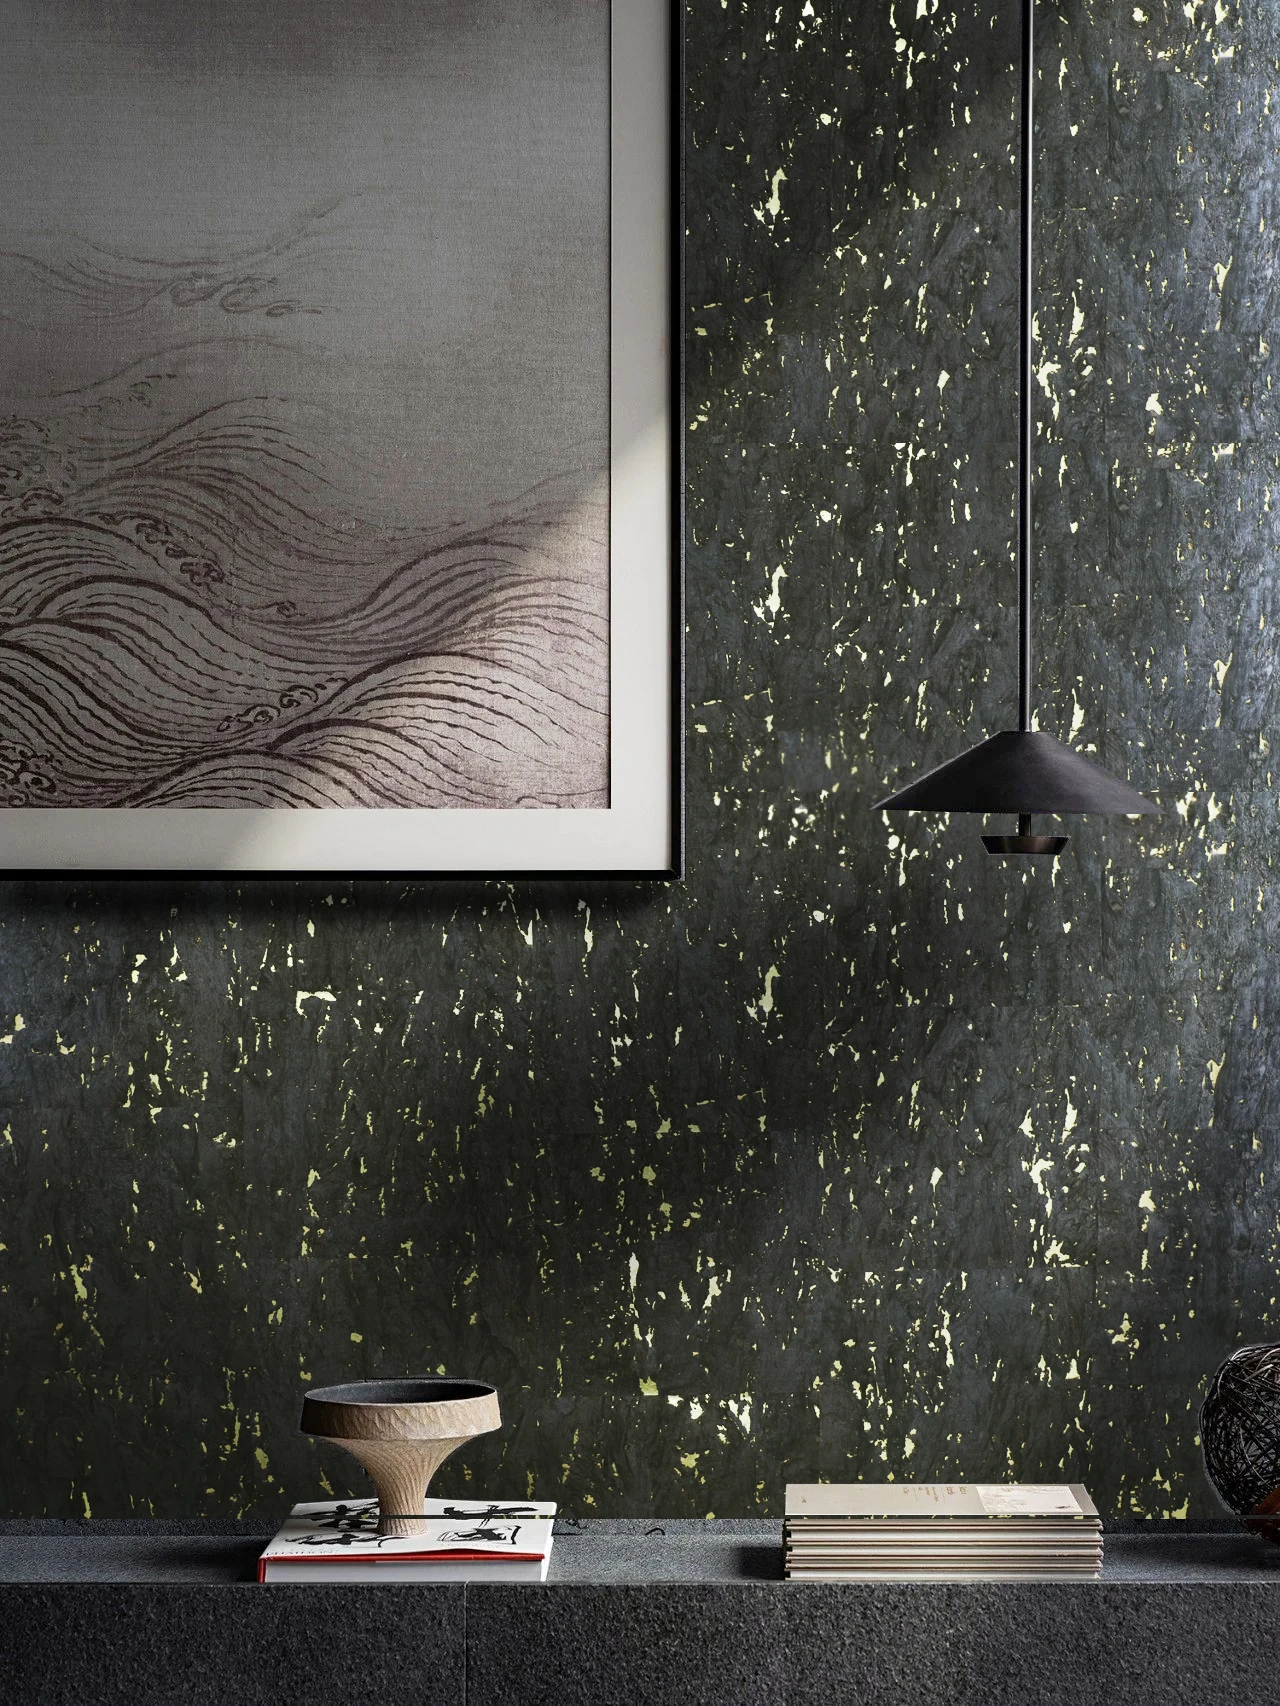 MYWIND 2021 Home Design Dark Brown Modern Carbon Black Cork Wallpaper Rolls Gold Metallic Textured Wall Paper water drawing cloth 70 43cm thick imitation drawing practice water paper cloth rolling calligraphy repeat write 2021